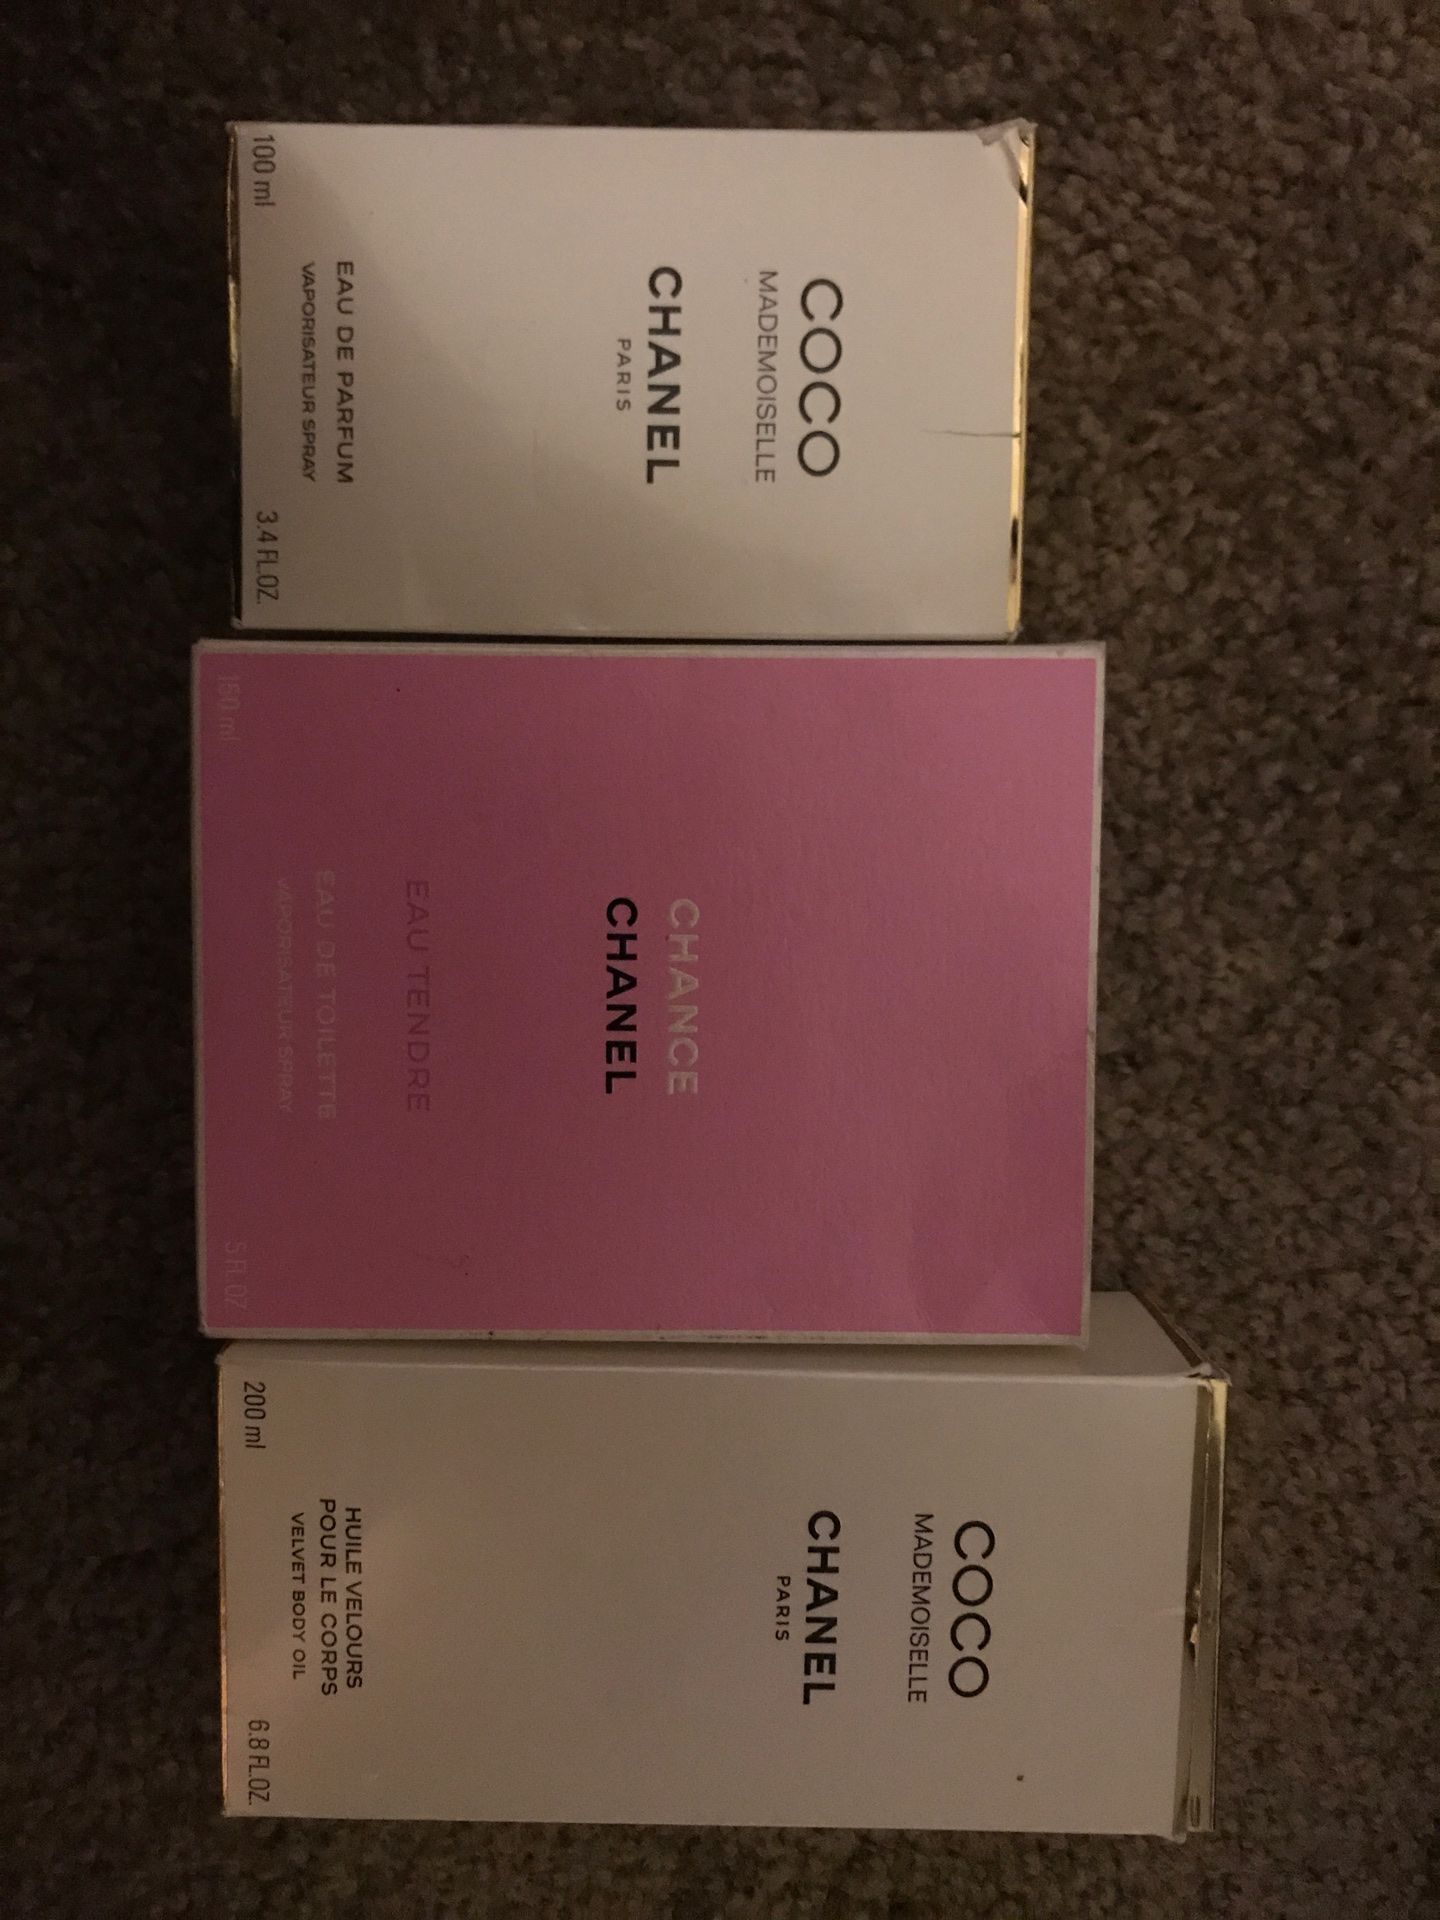 Chanel coco & chance perfume almost brand new